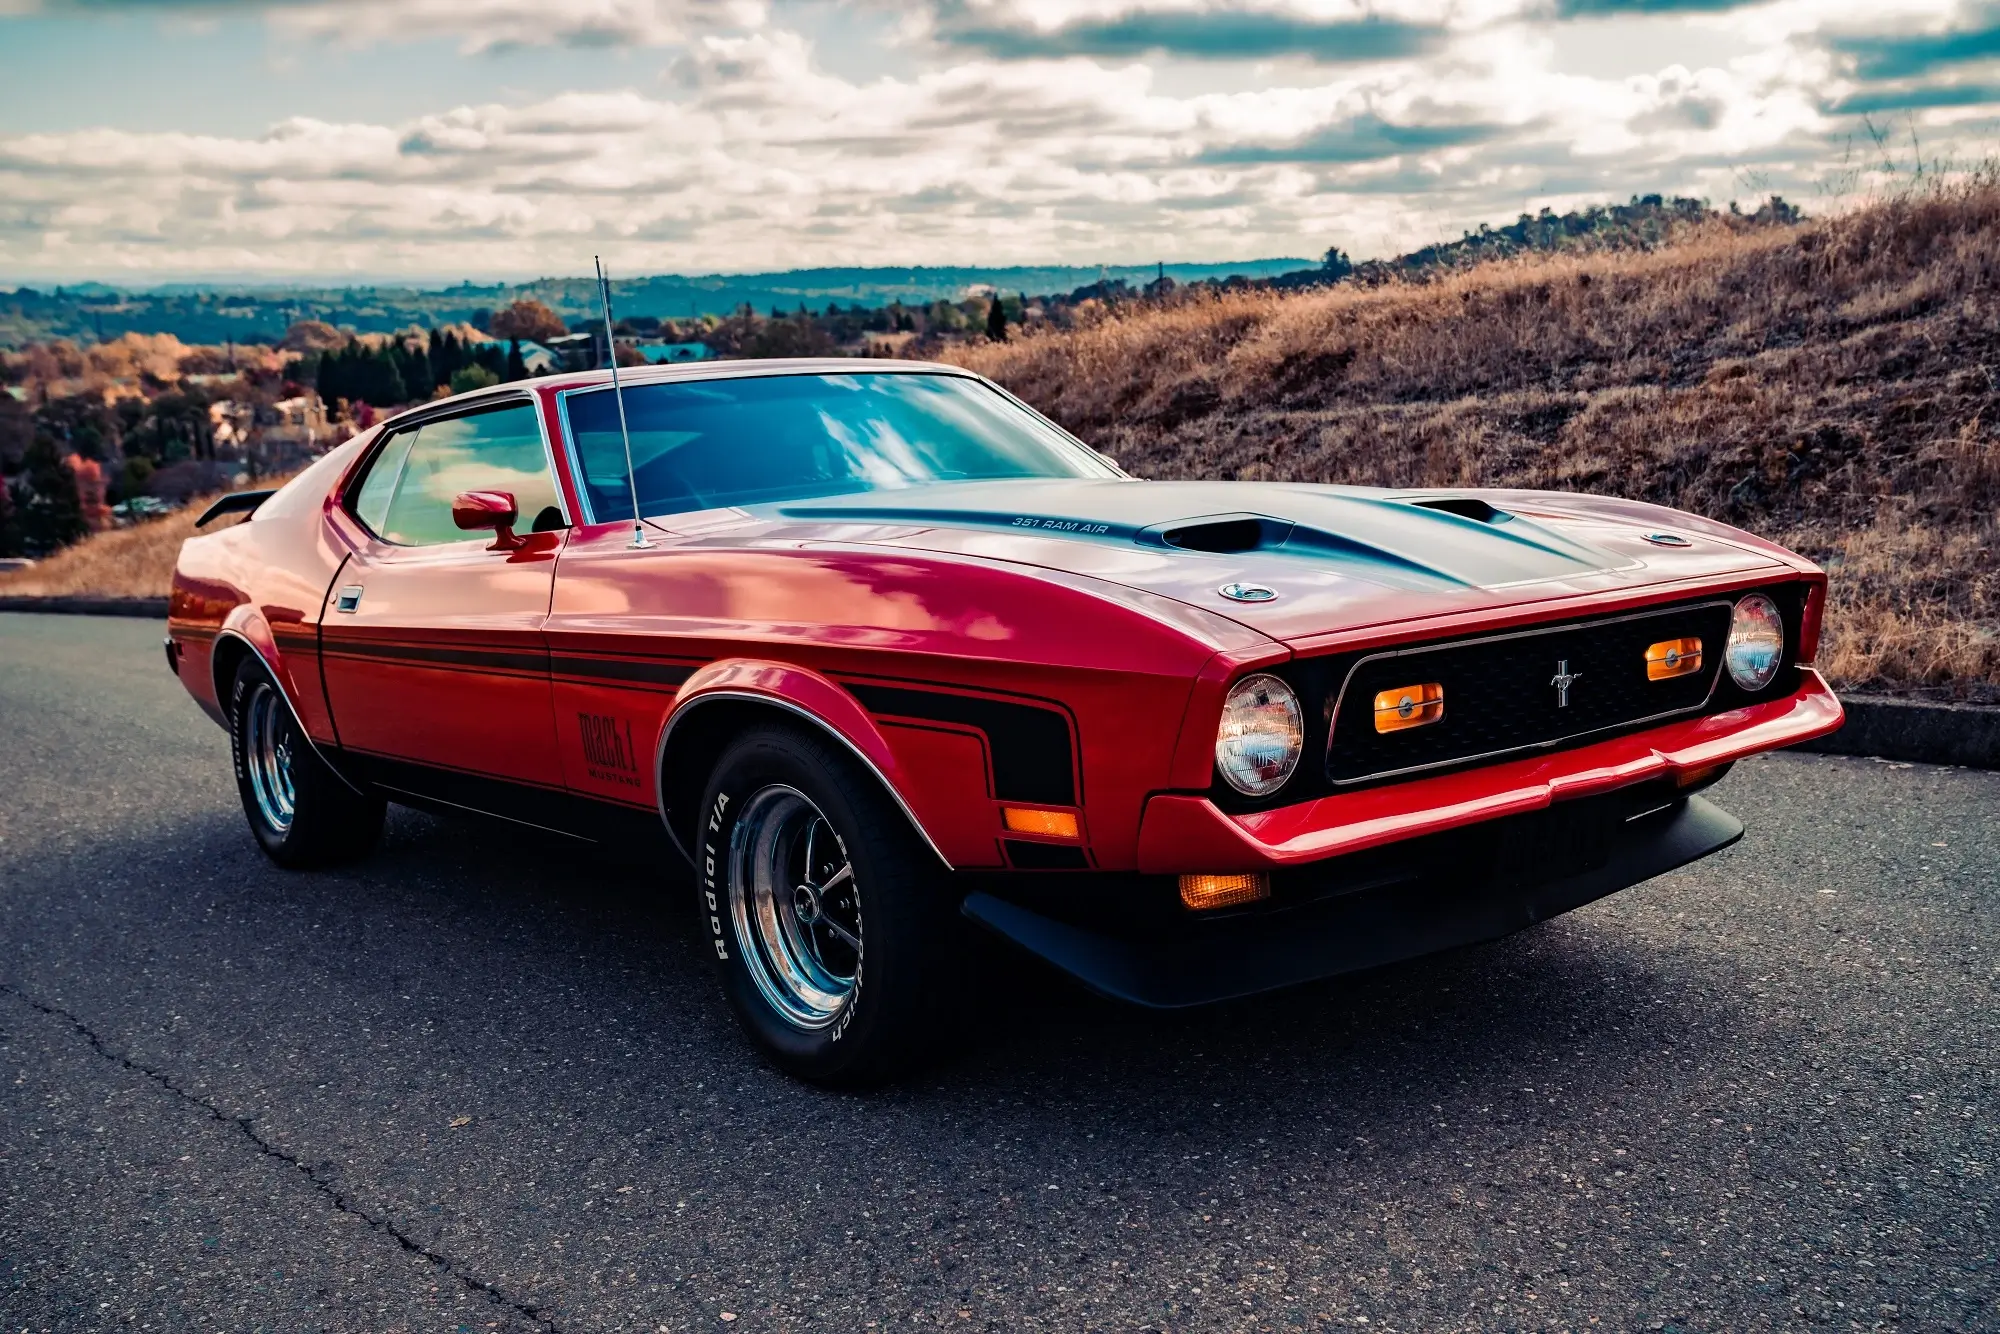 A red 1972 Ford Mustang Mach 1, representing the concept of car FBT.